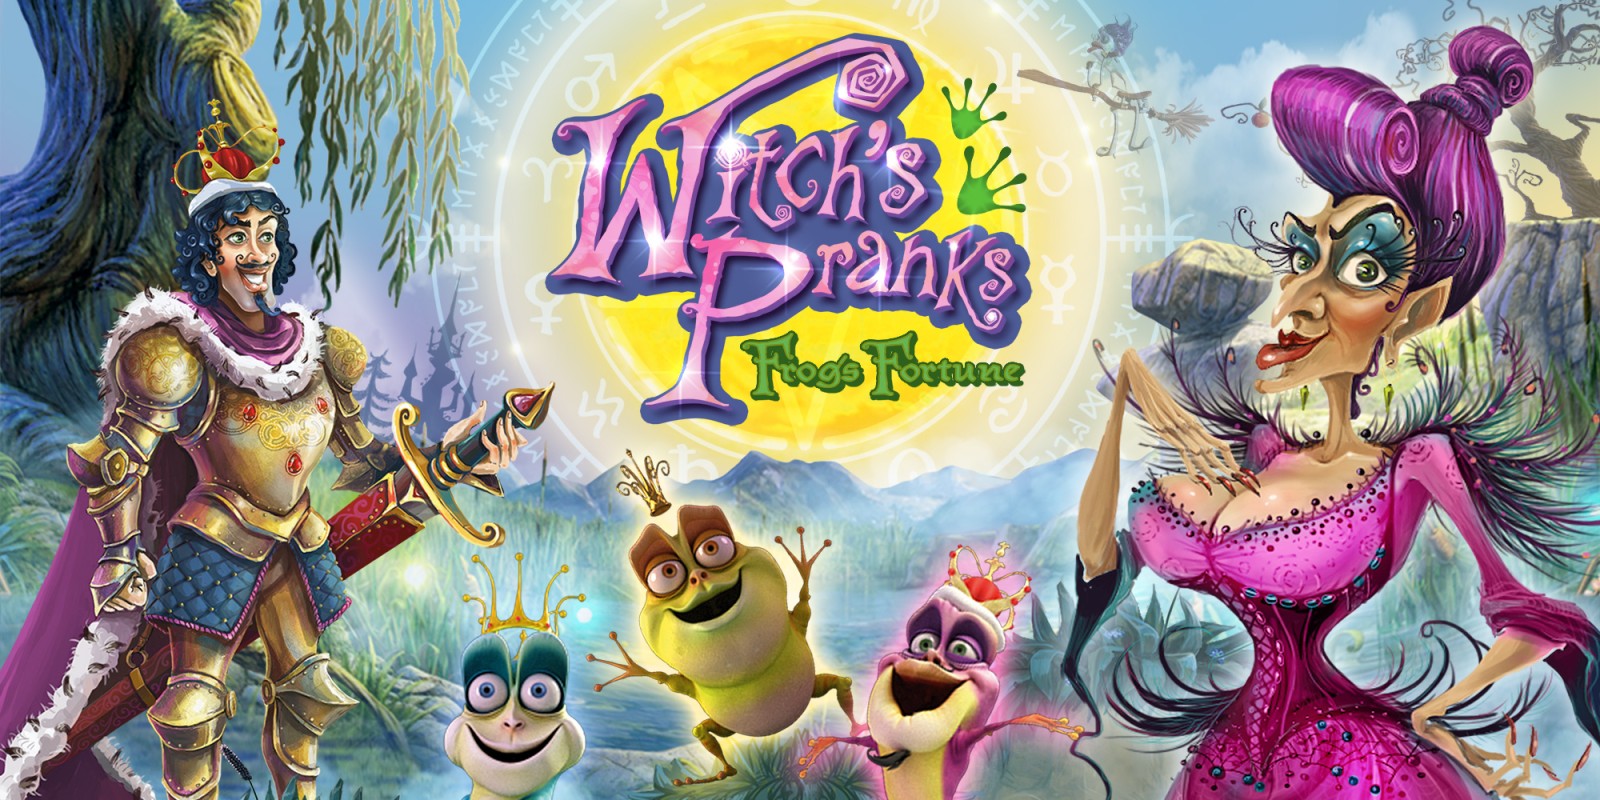 Witch's Pranks - Frog's Fortune